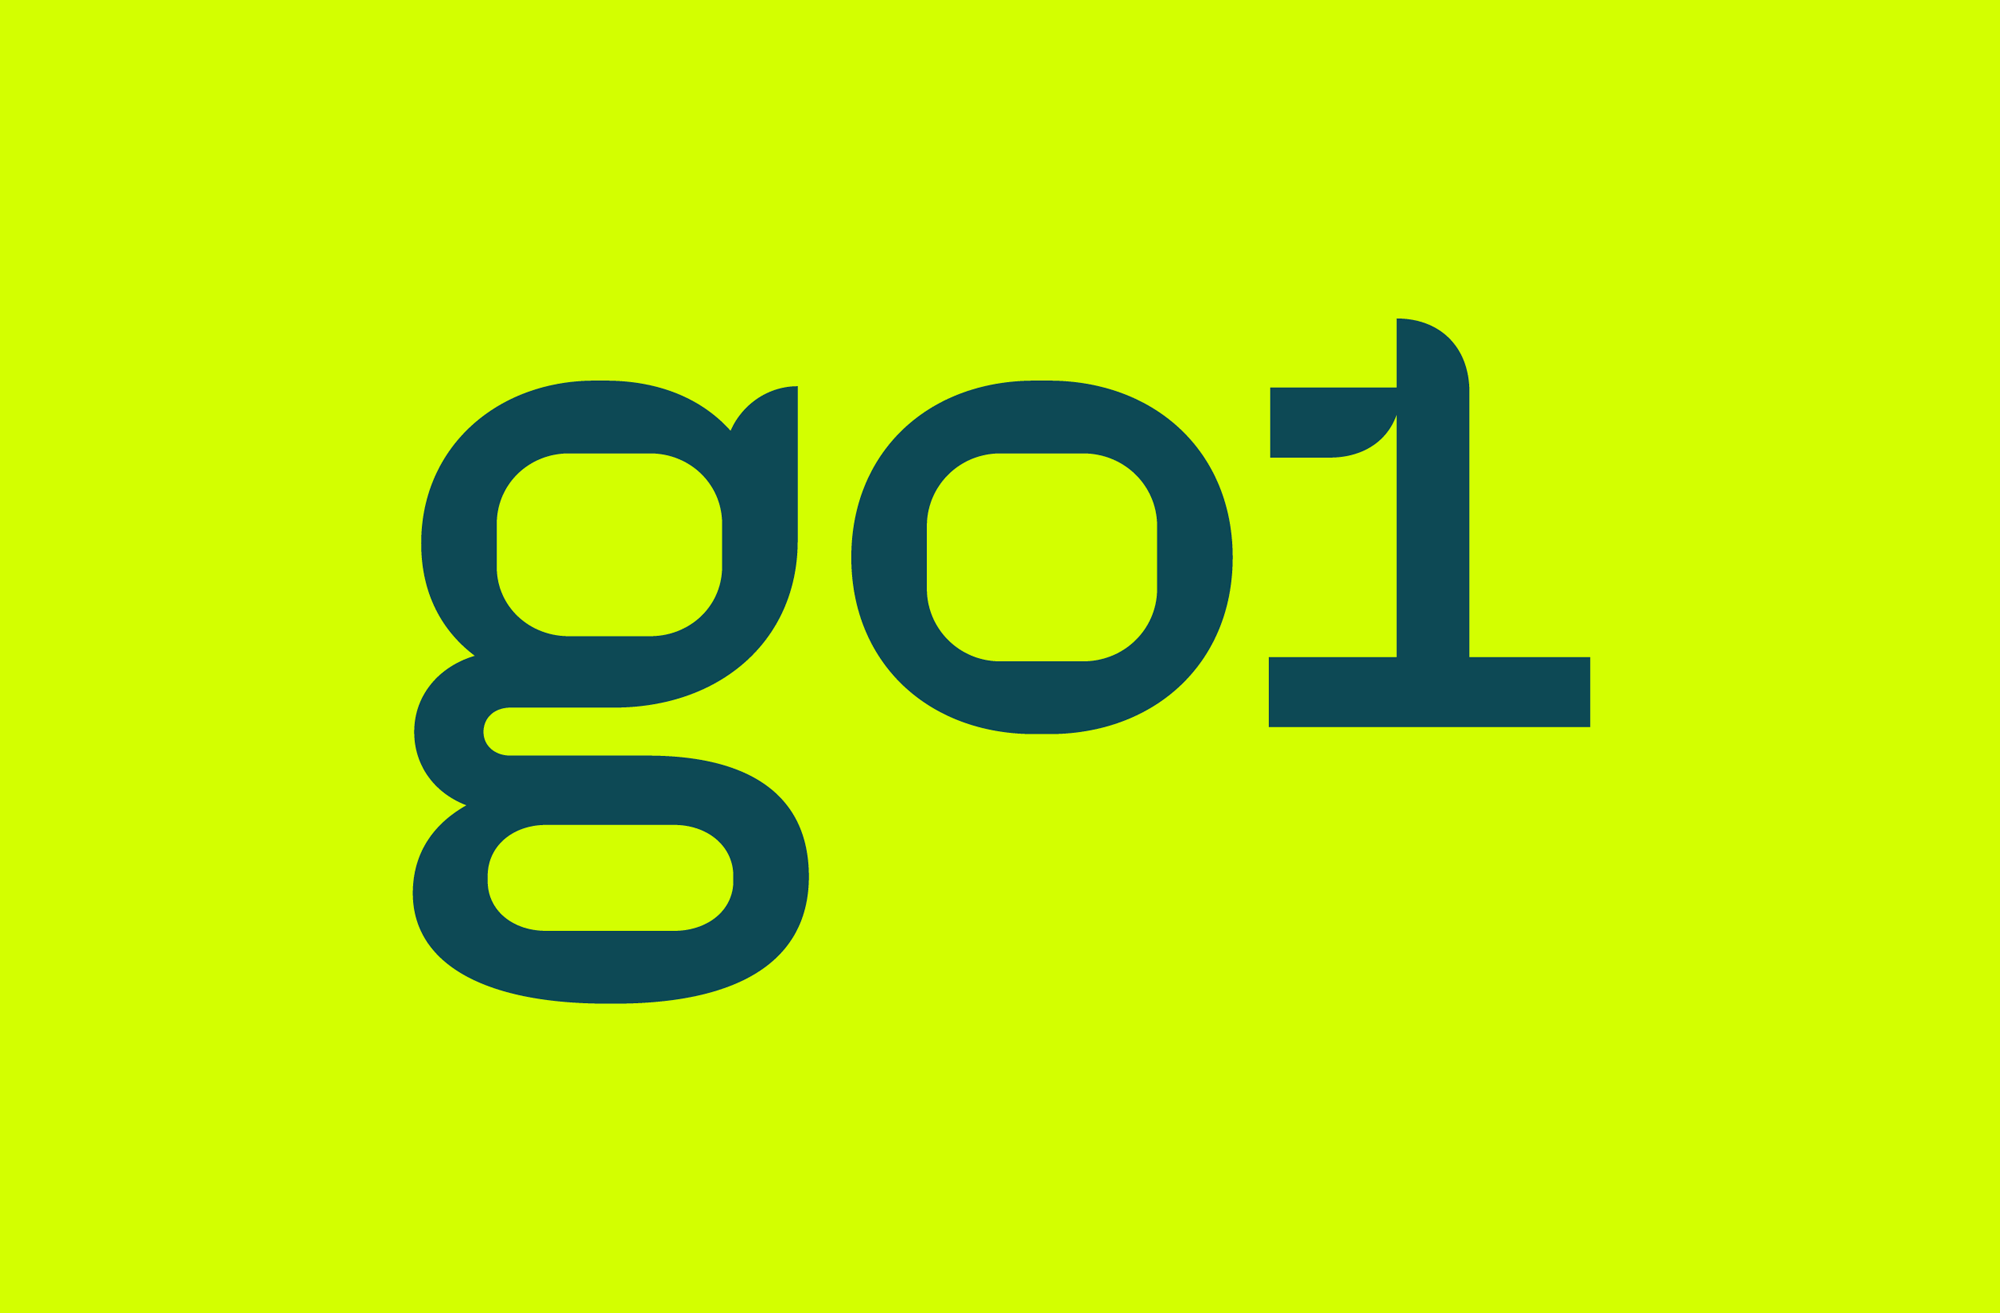 New Logo and Identity for Go1 by DesignStudio